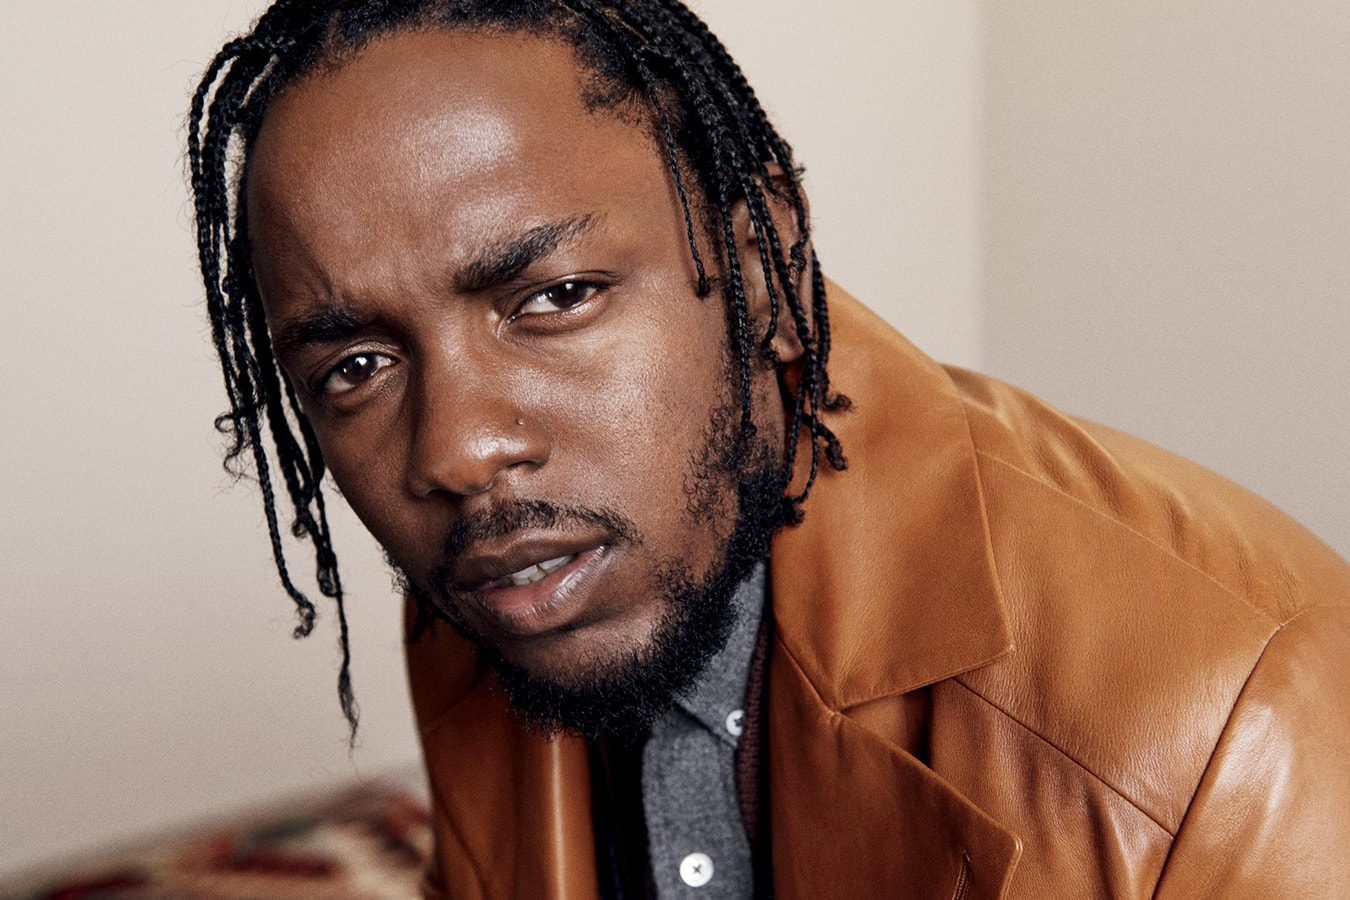 It's time to talk about Kendrick Lamar as a style icon - GQ Australia